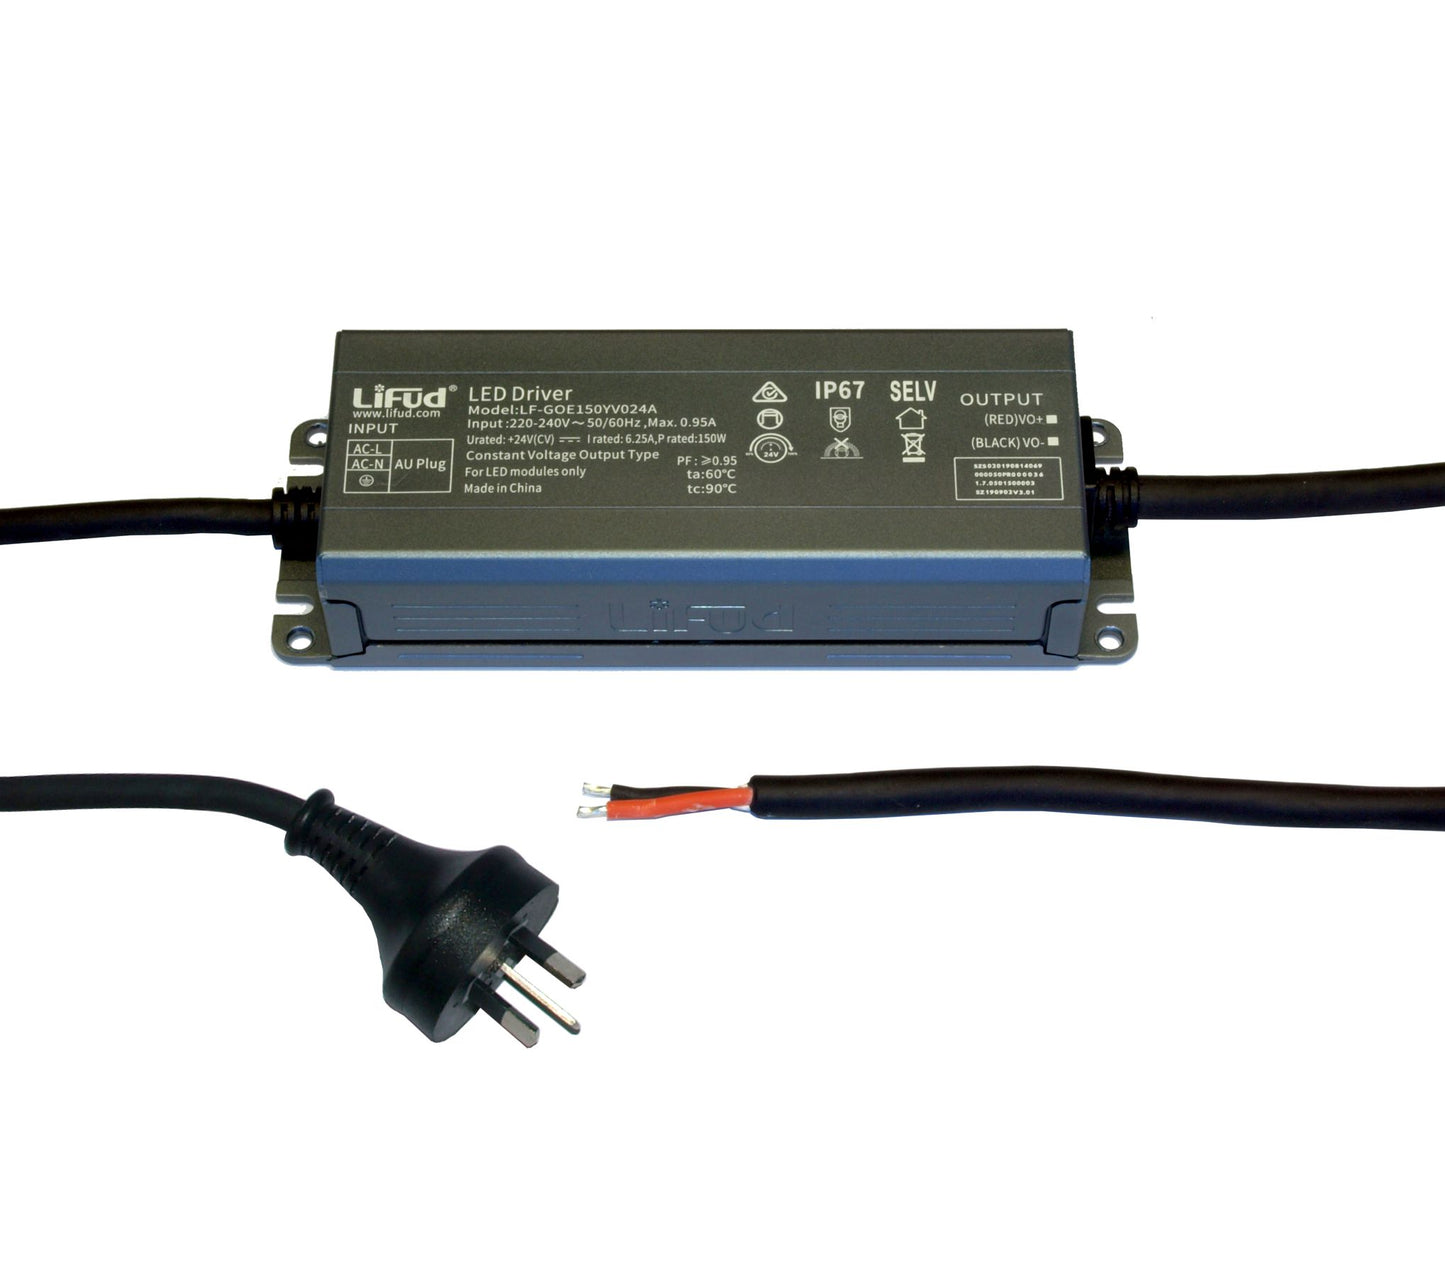 [China]LIFUD GOE Series Constant Voltage LED Driver-Ballast /Drivers-DELIGHT OptoElectronics Pte. Ltd